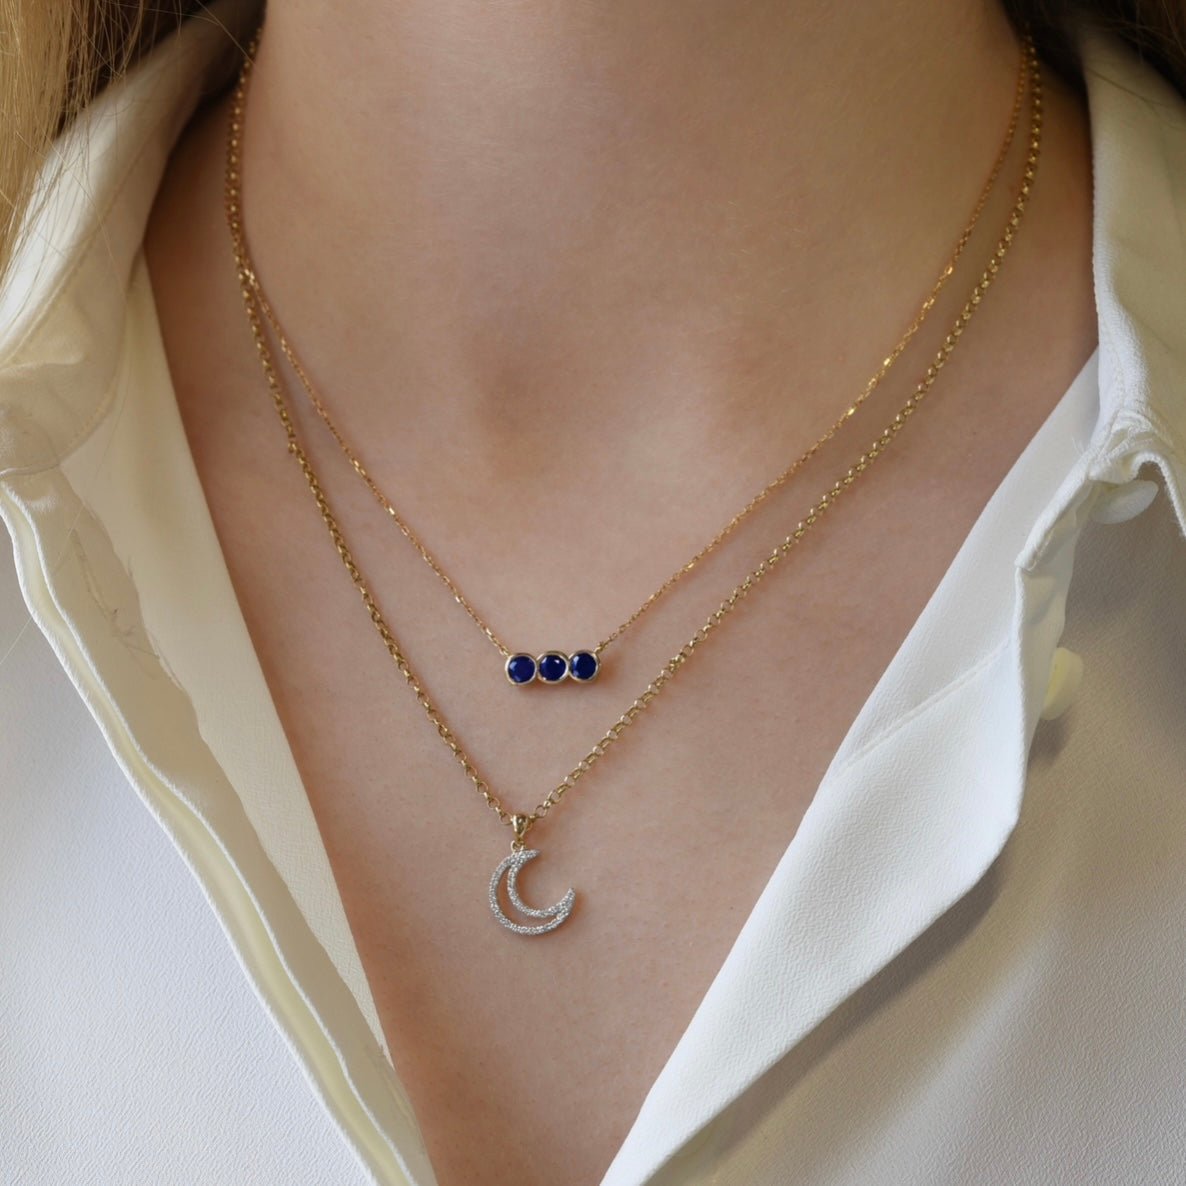 Crescent Necklace in Diamond - 18k Gold - Ly